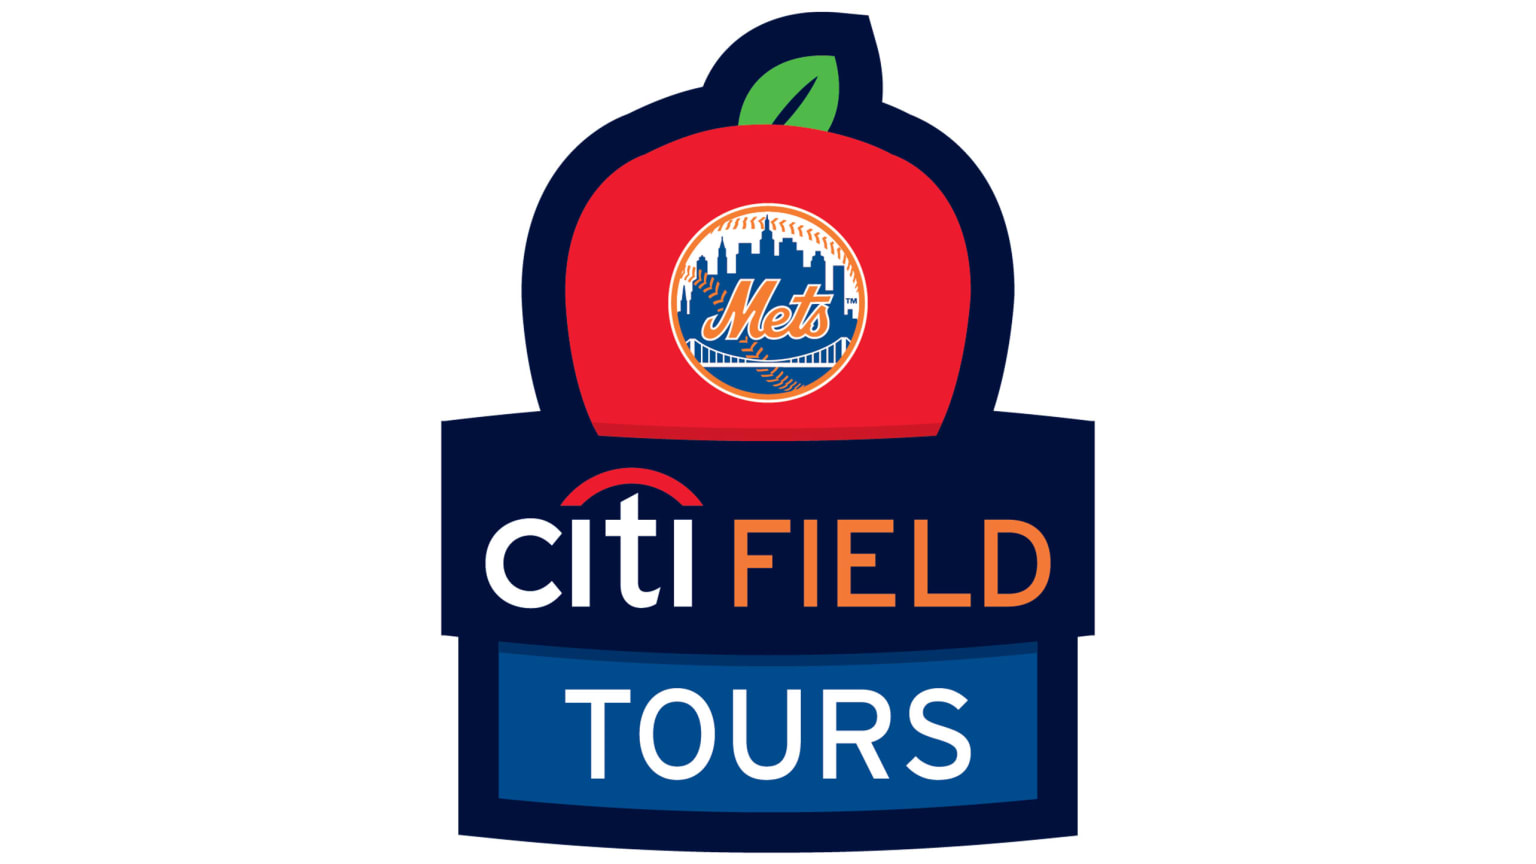 Join The New York Mets Exclusive Fan Club! It's Only $25,000